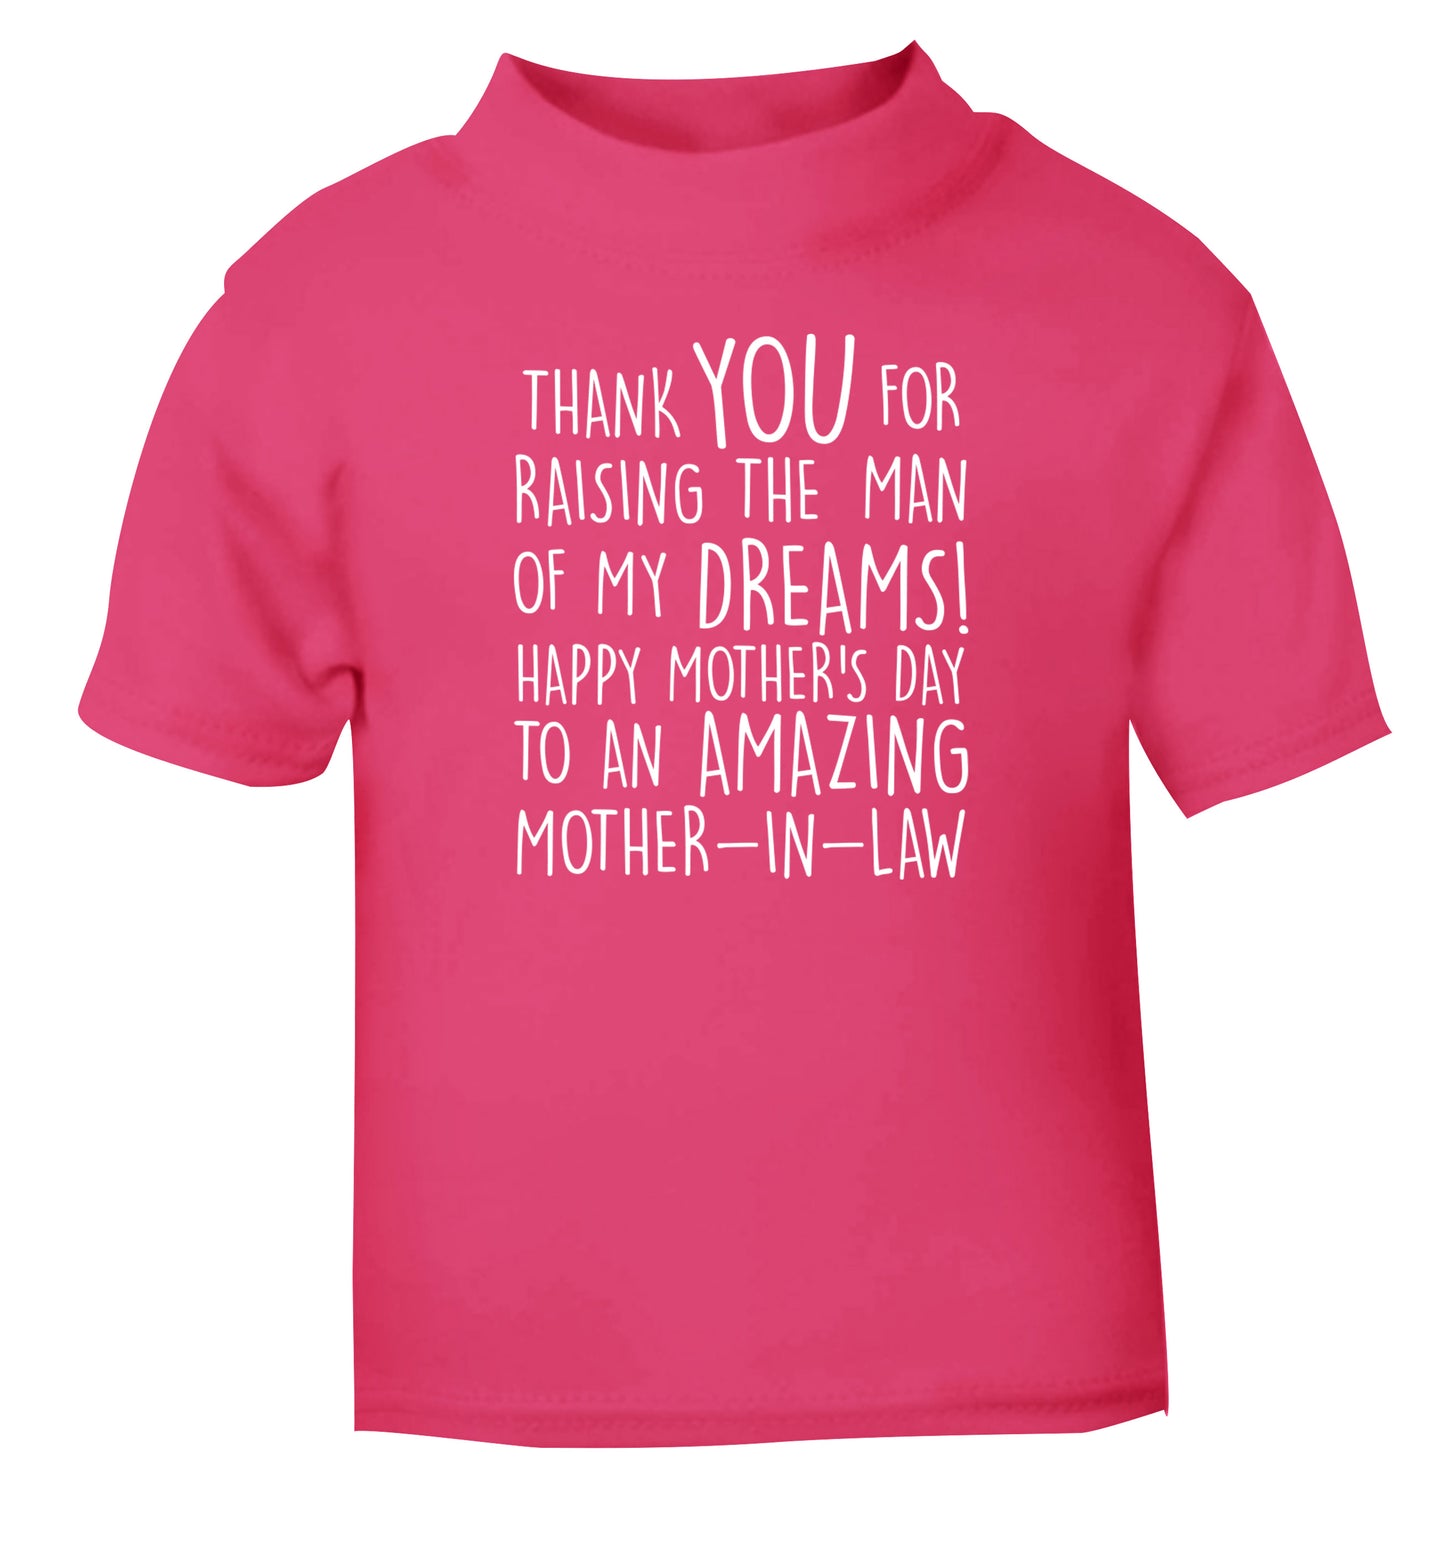 Thank you for raising the man of my dreams happy mother's day mother-in-law pink Baby Toddler Tshirt 2 Years